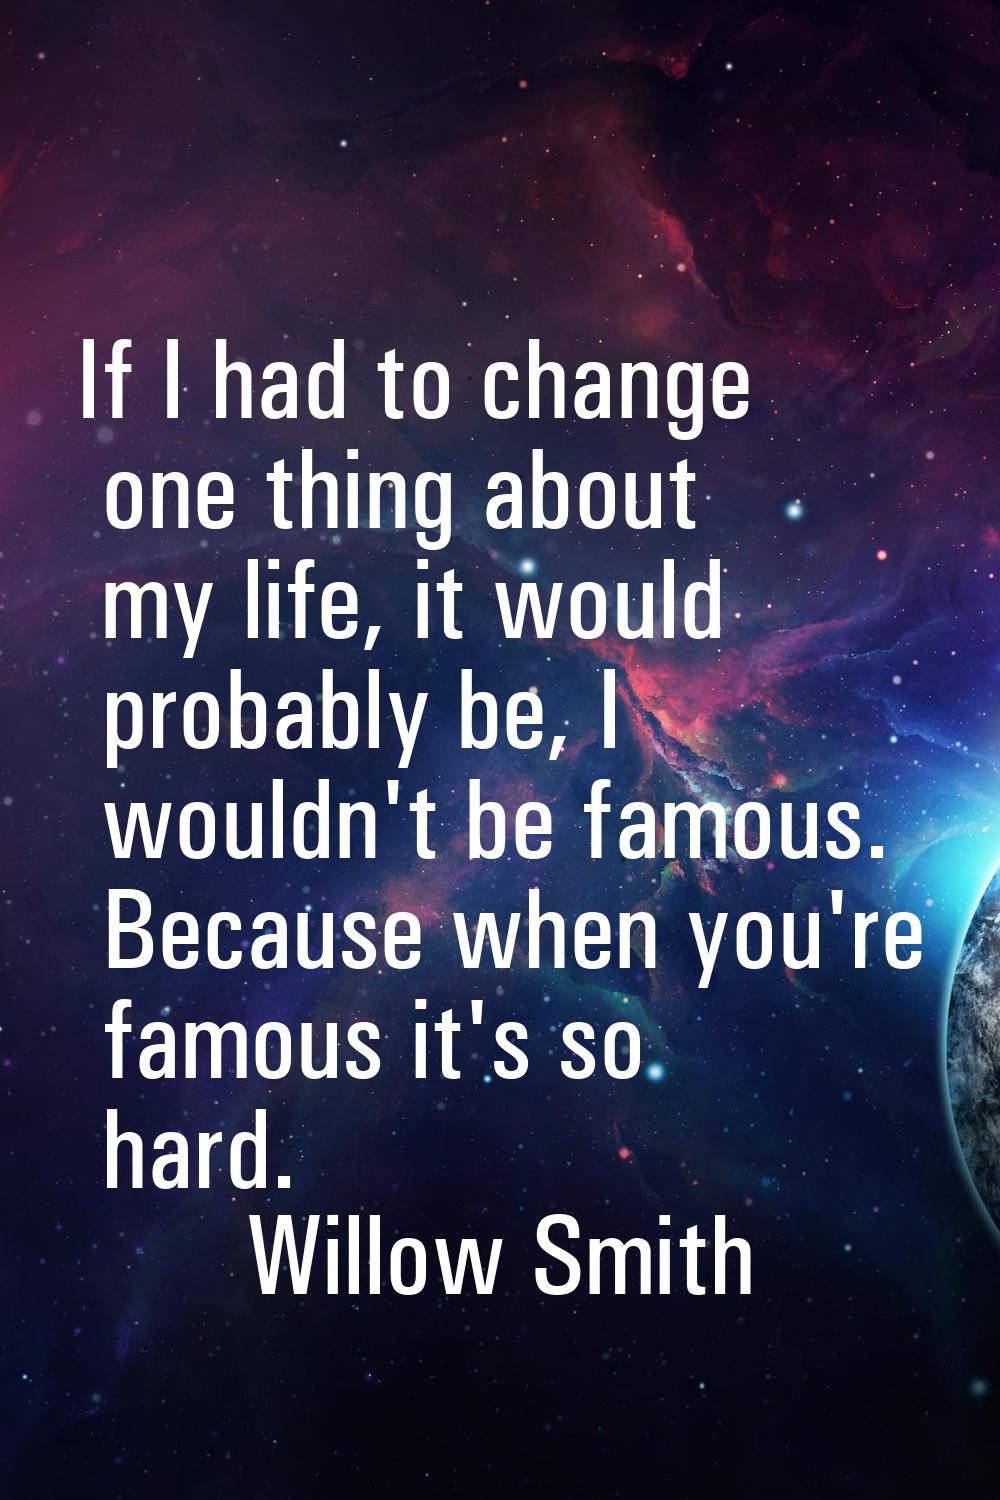 If I had to change one thing about my life, it would probably be, I wouldn't be famous. Because whe